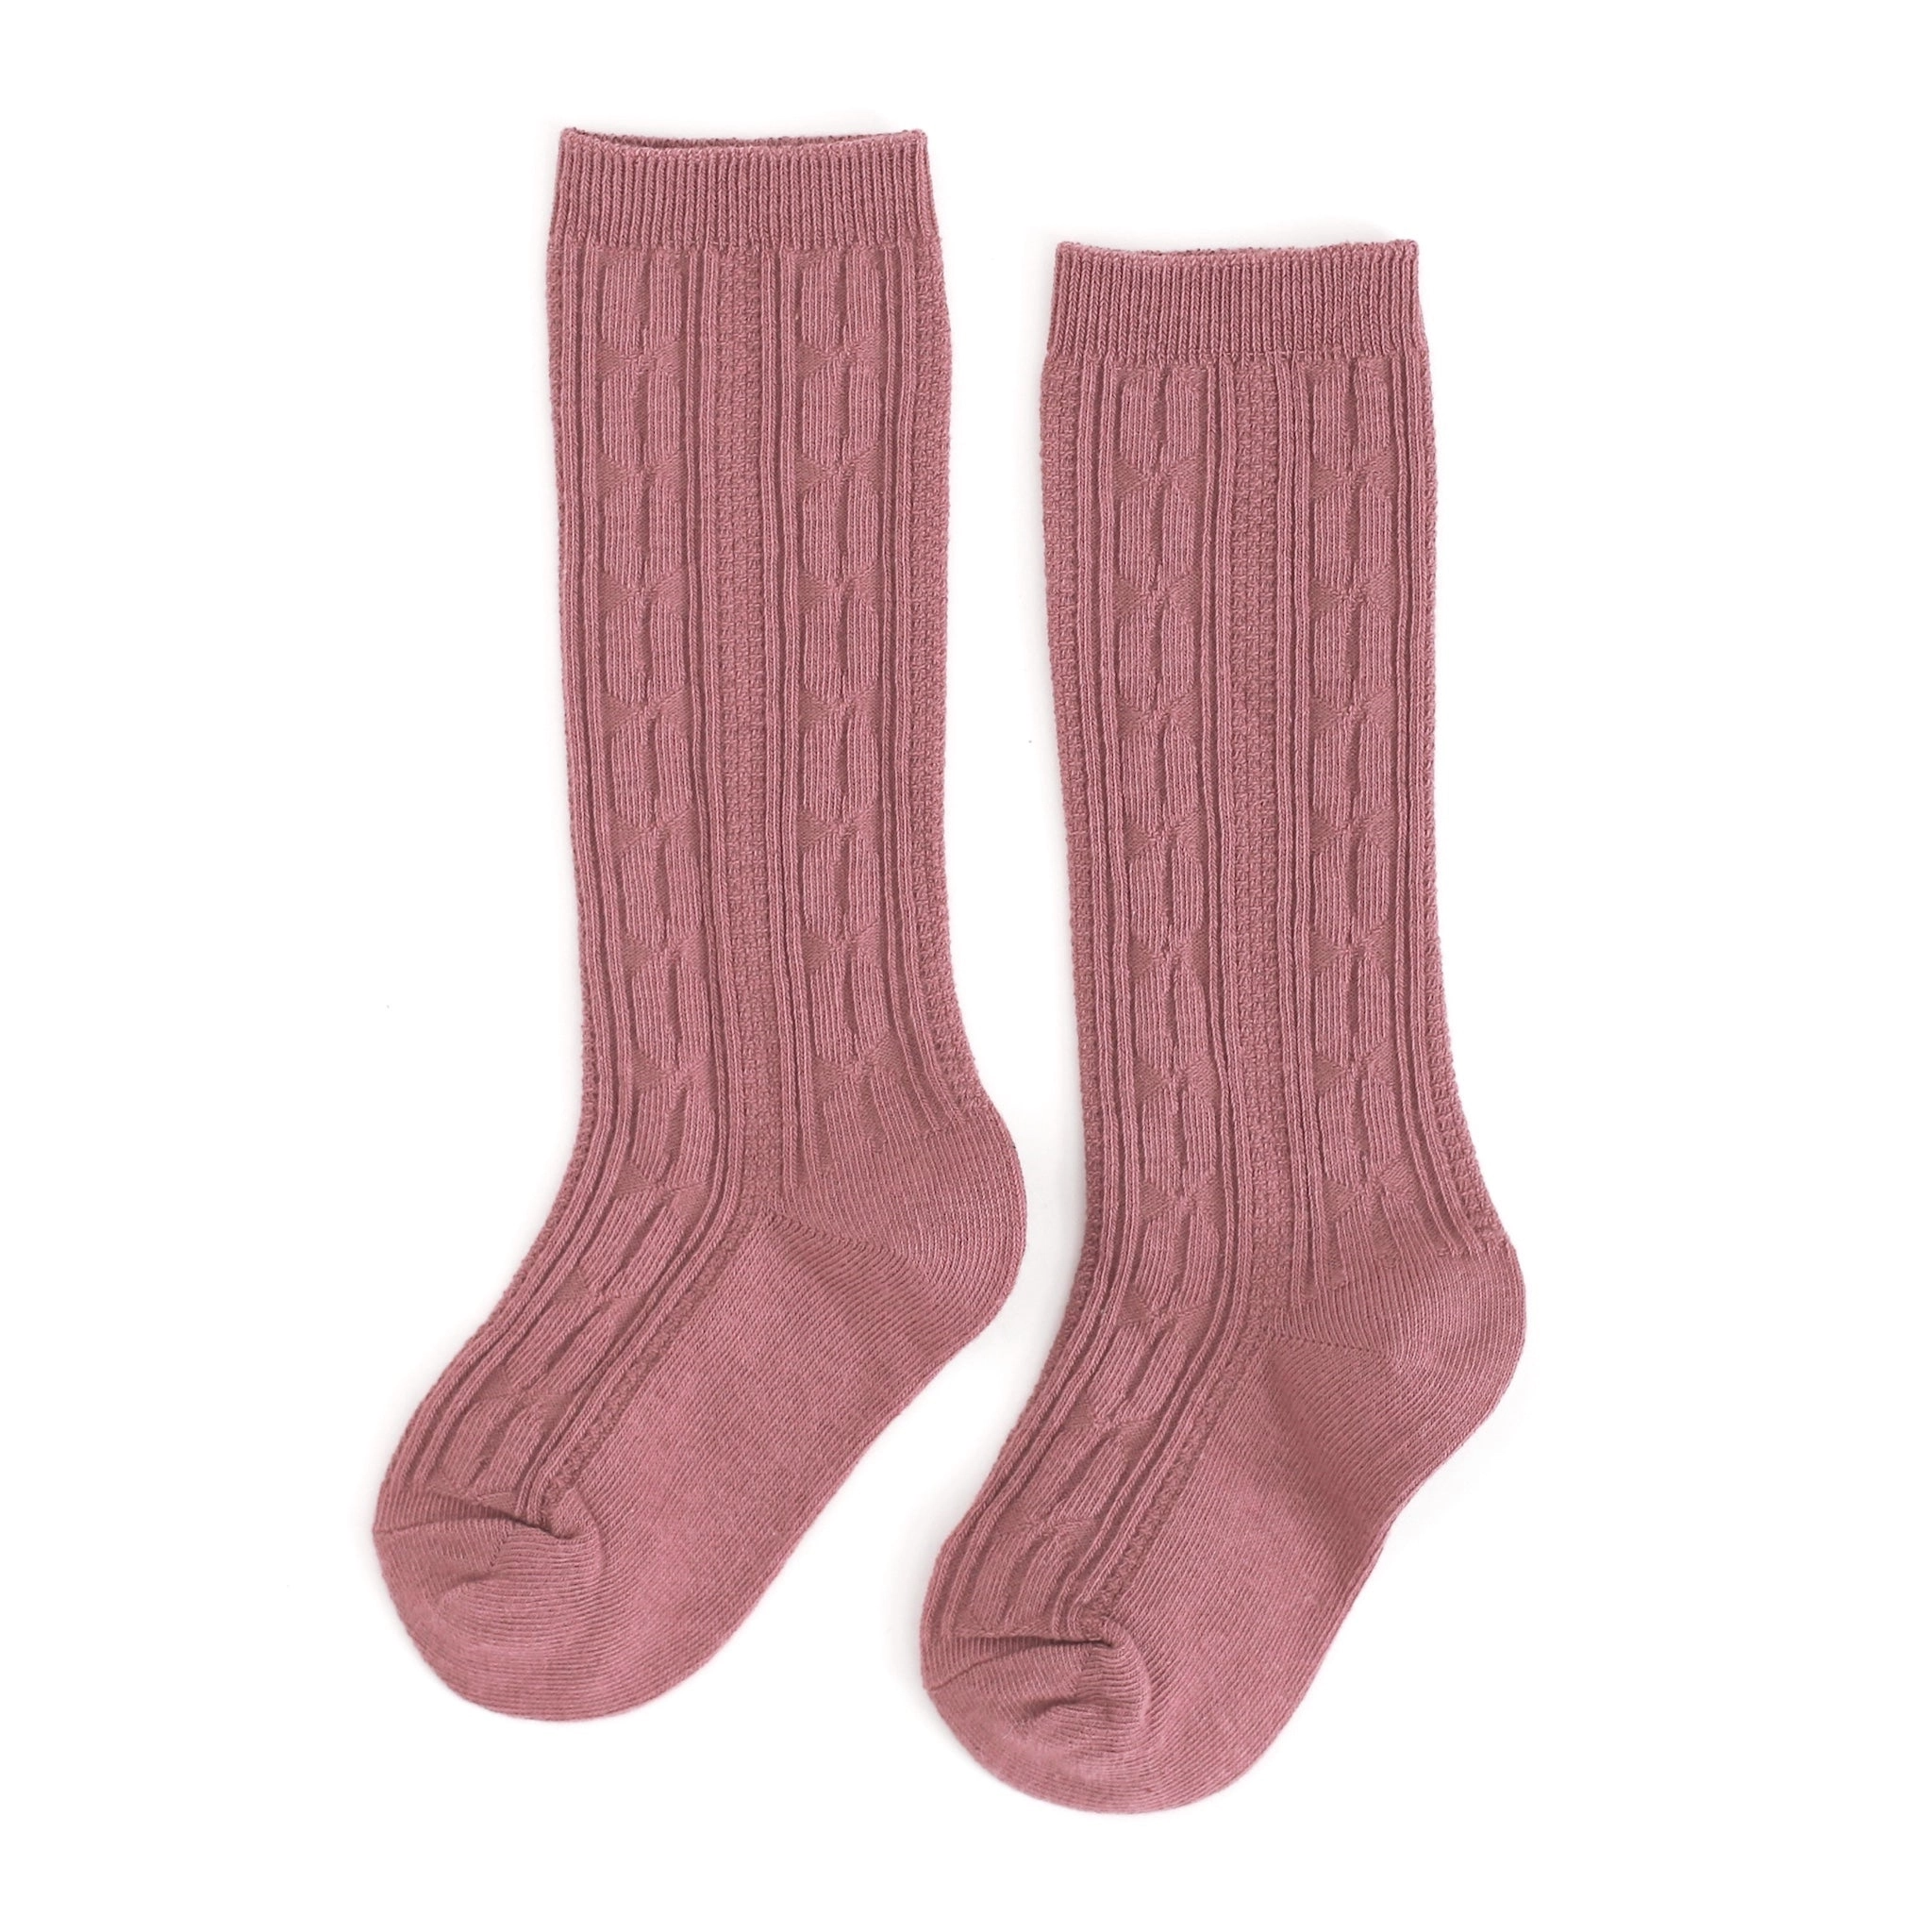 Mauve Rose Cable Knit Knee High Socks - Little Stocking Co.